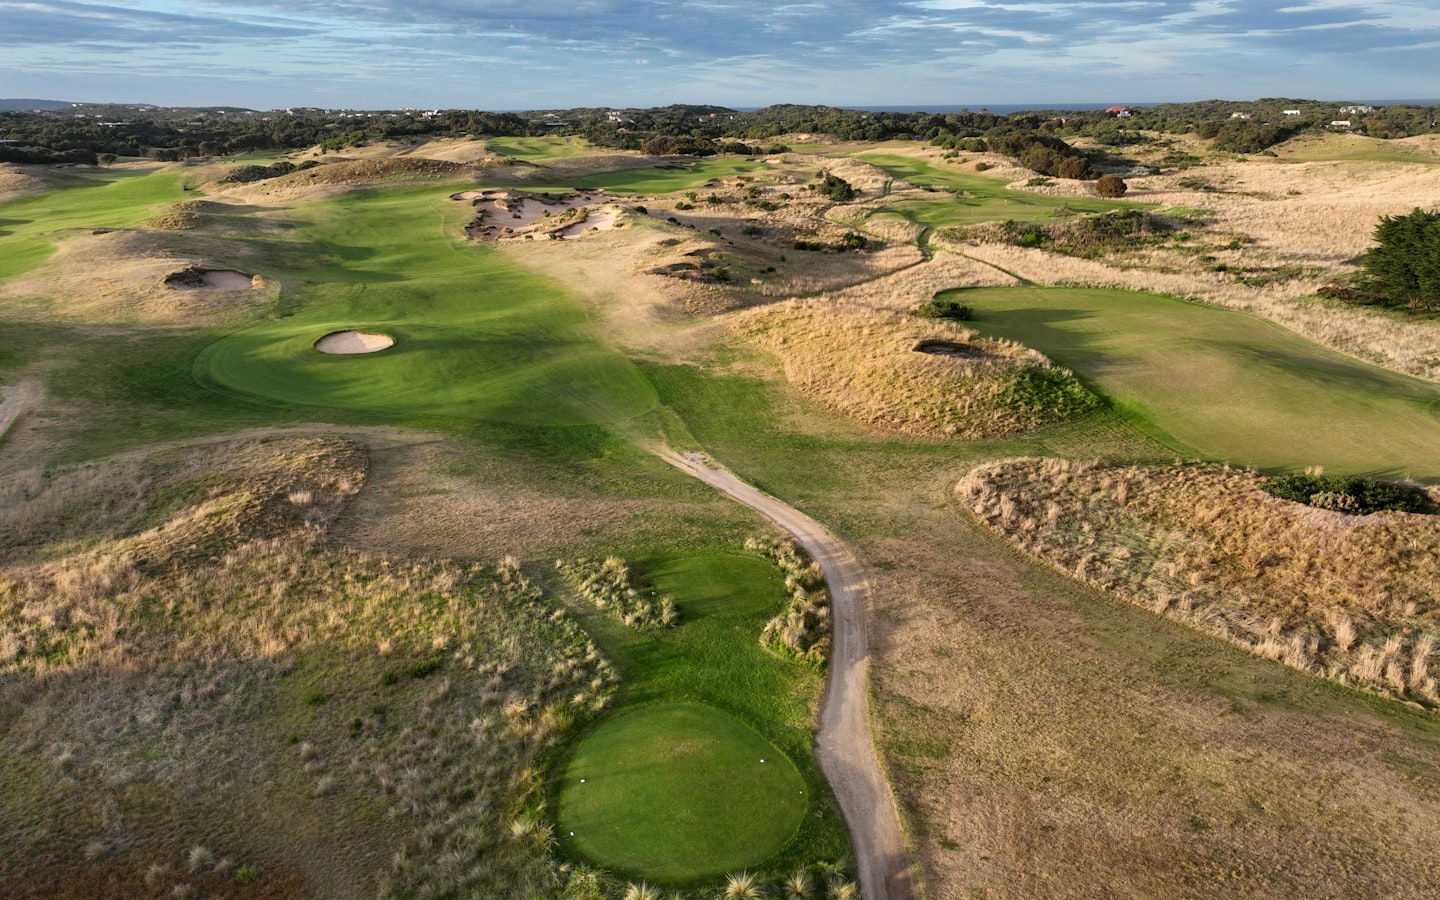 The dunes golf course